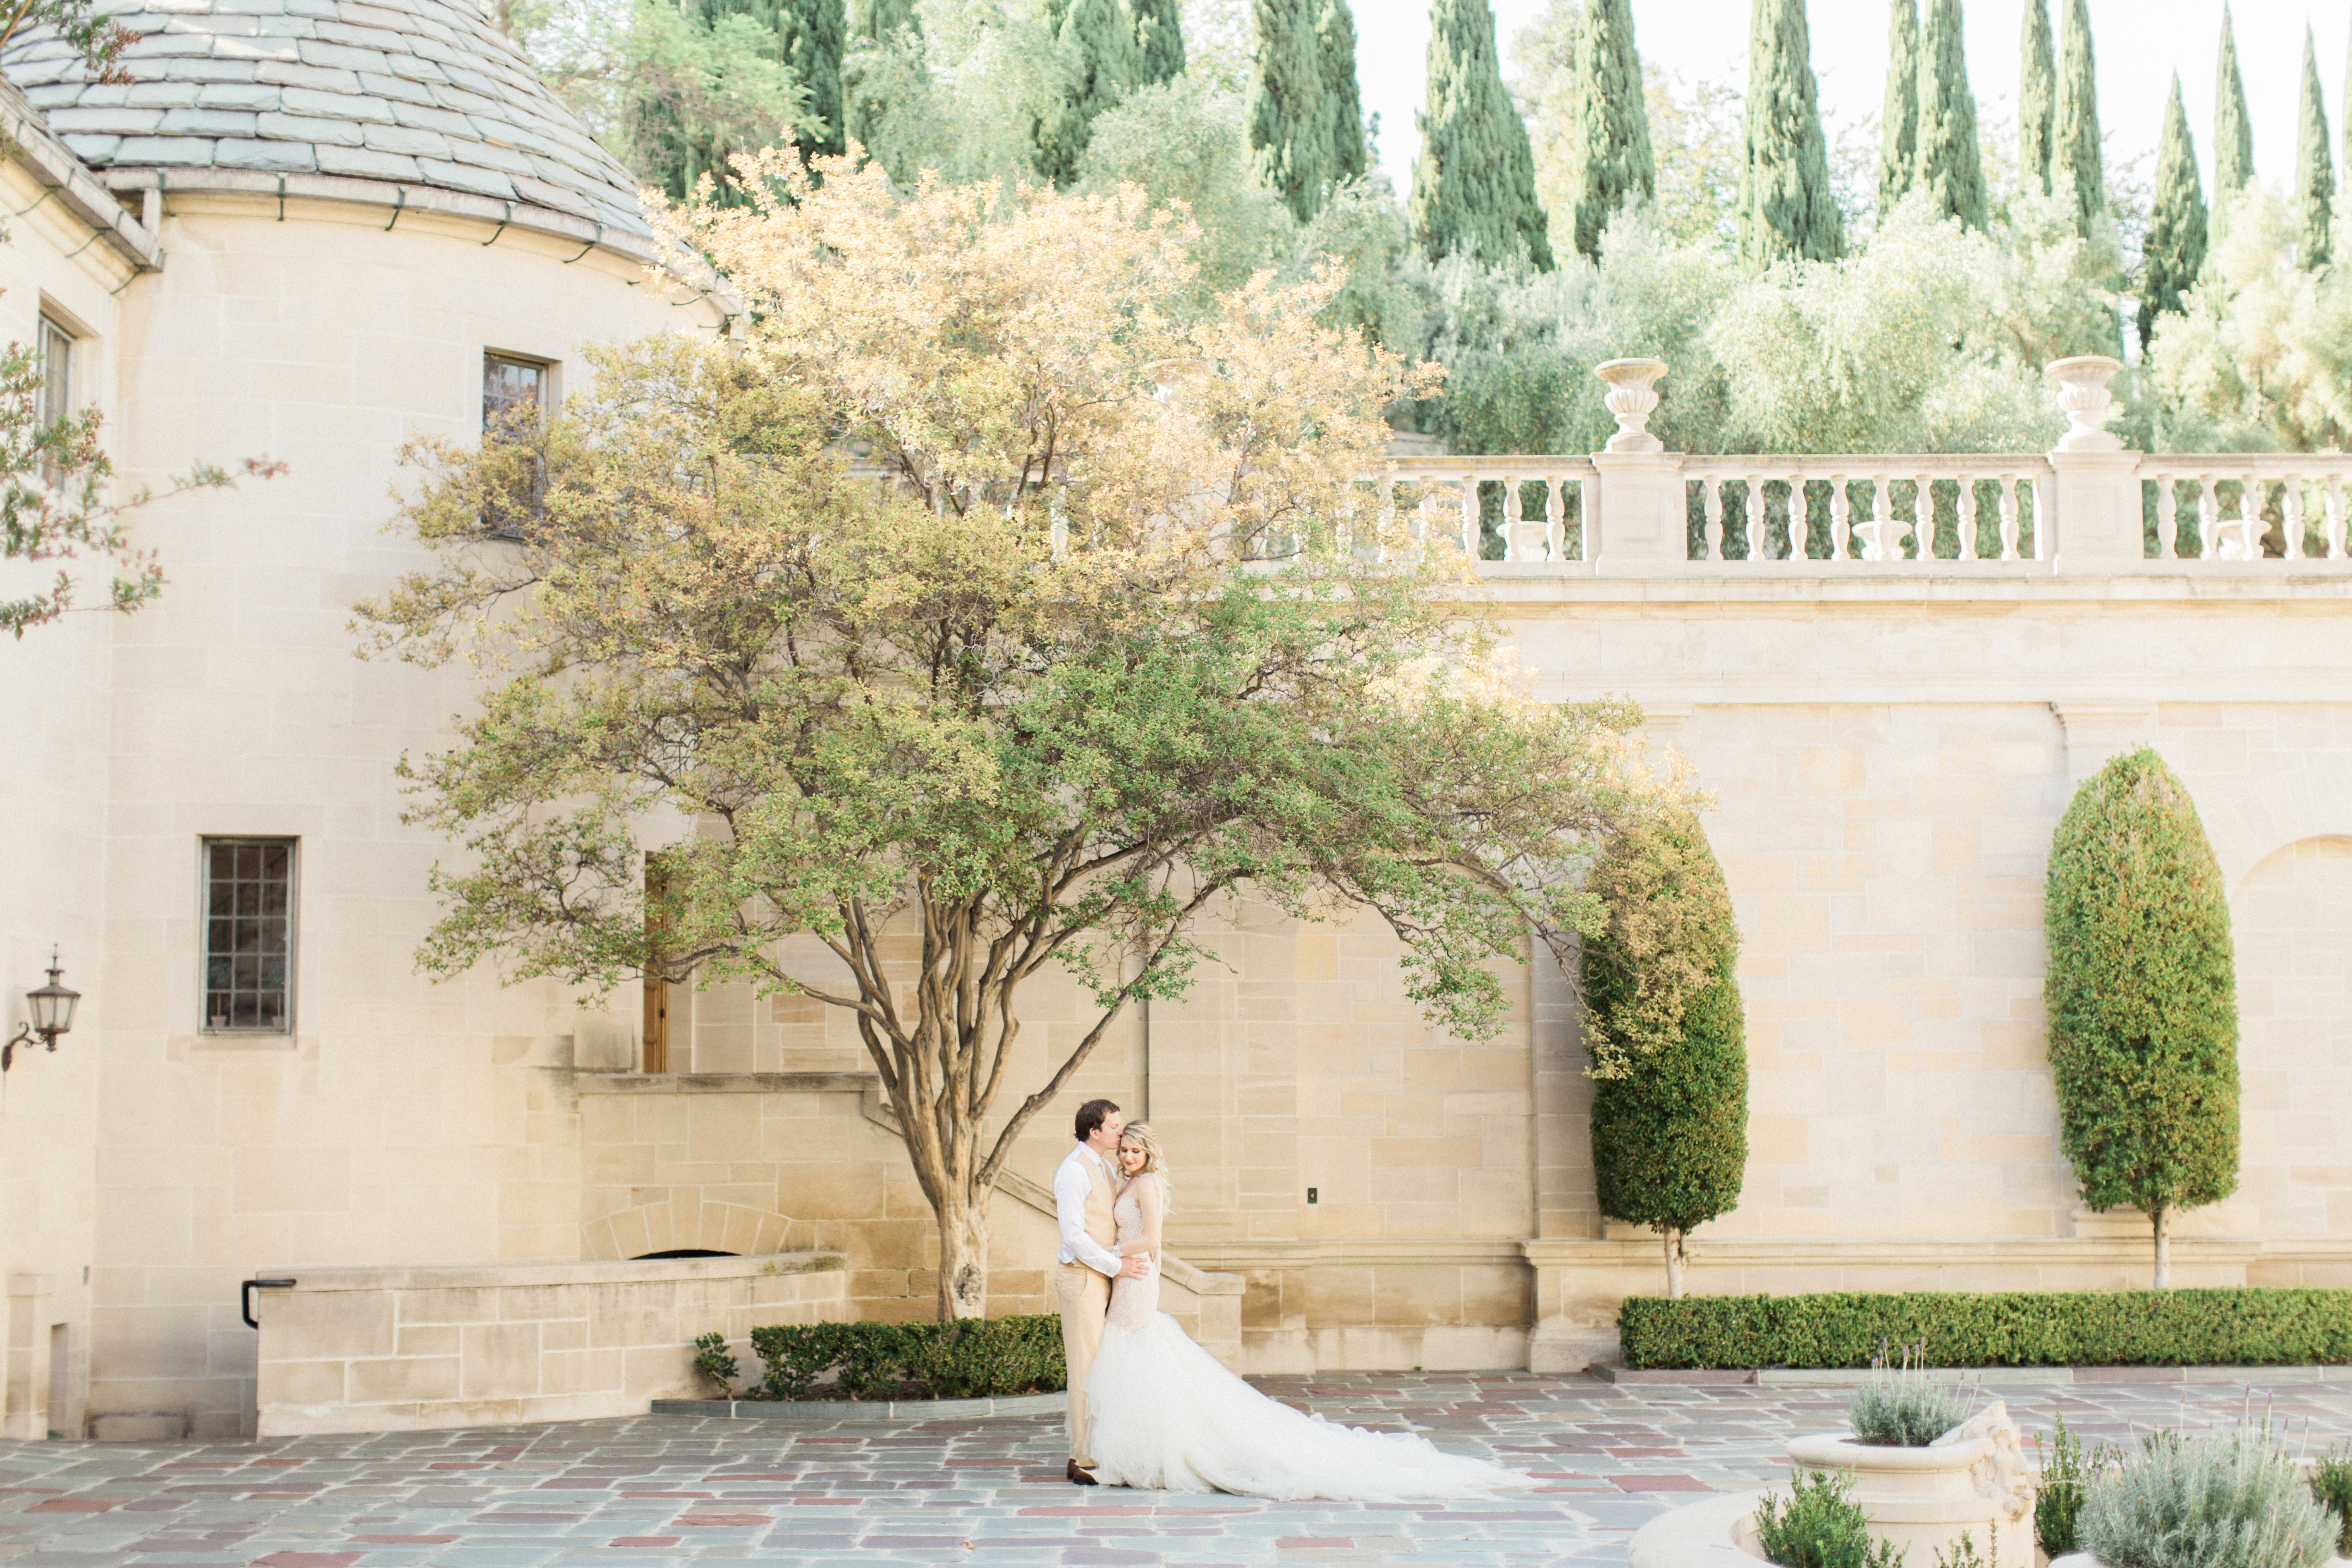 Wedding dresses that make a statement - all the beautiful tulle! 